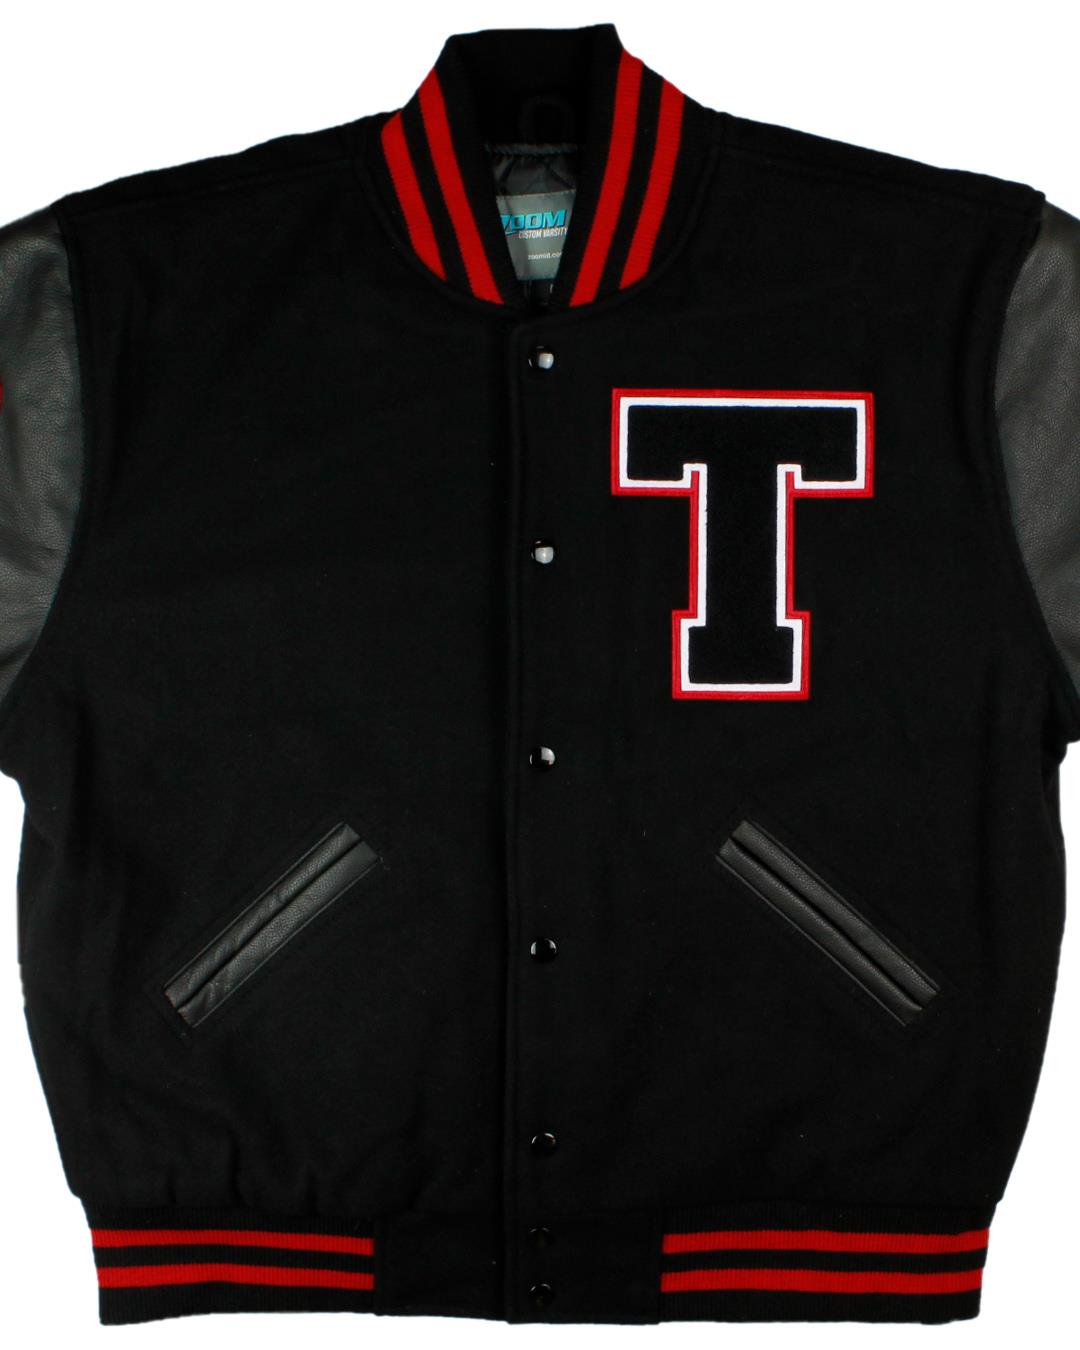 Euless Trinity High School Letterman, Euless, TX - Front